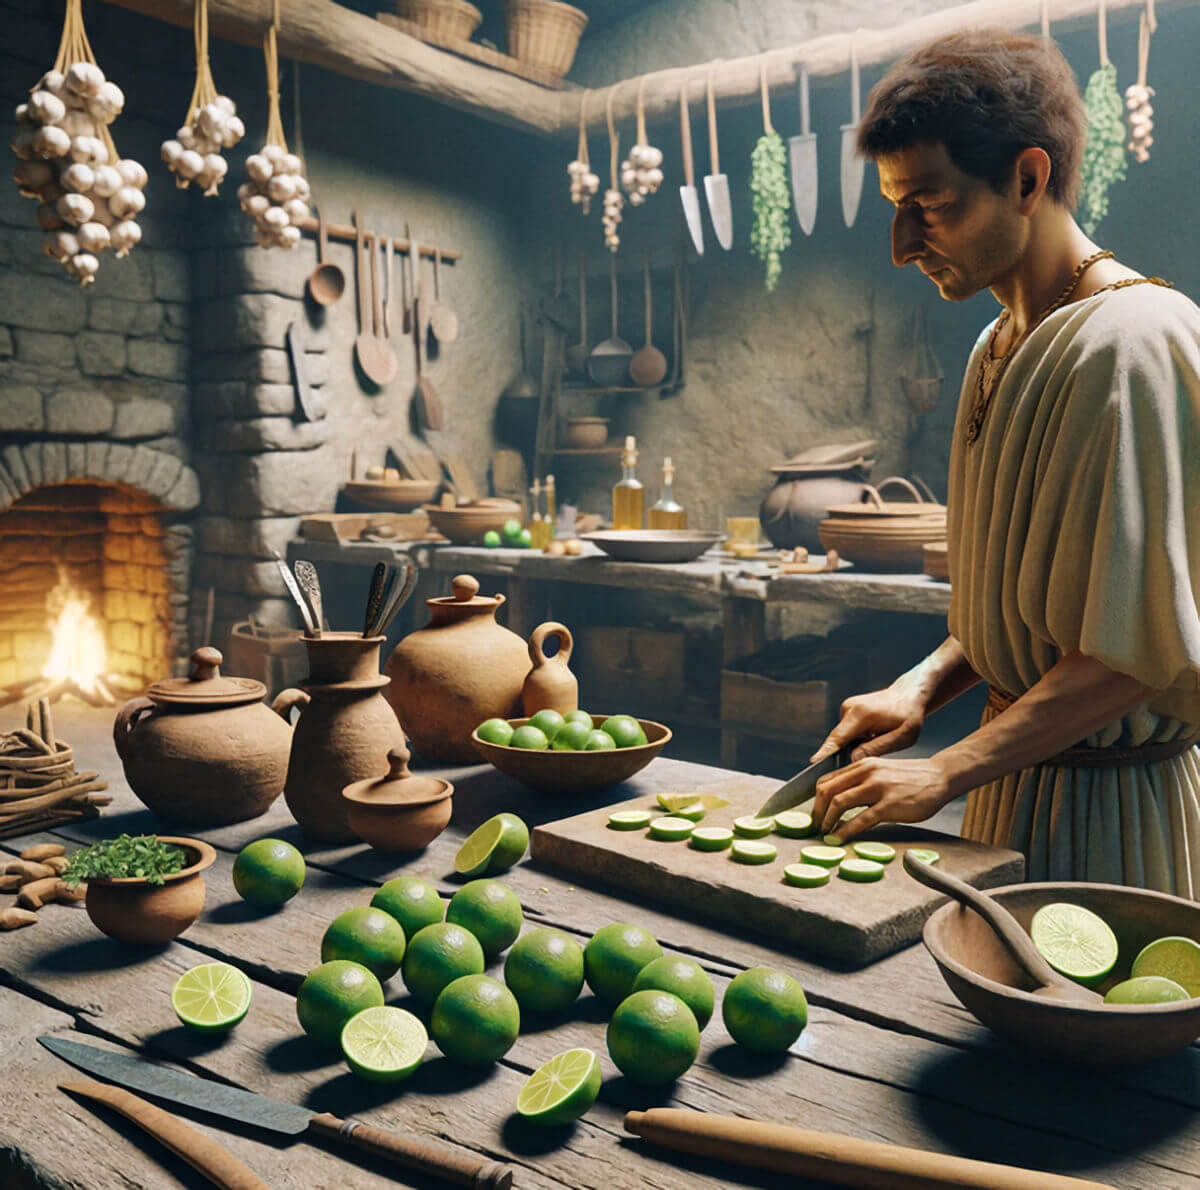 Limes being chopped in a Roman kitchen